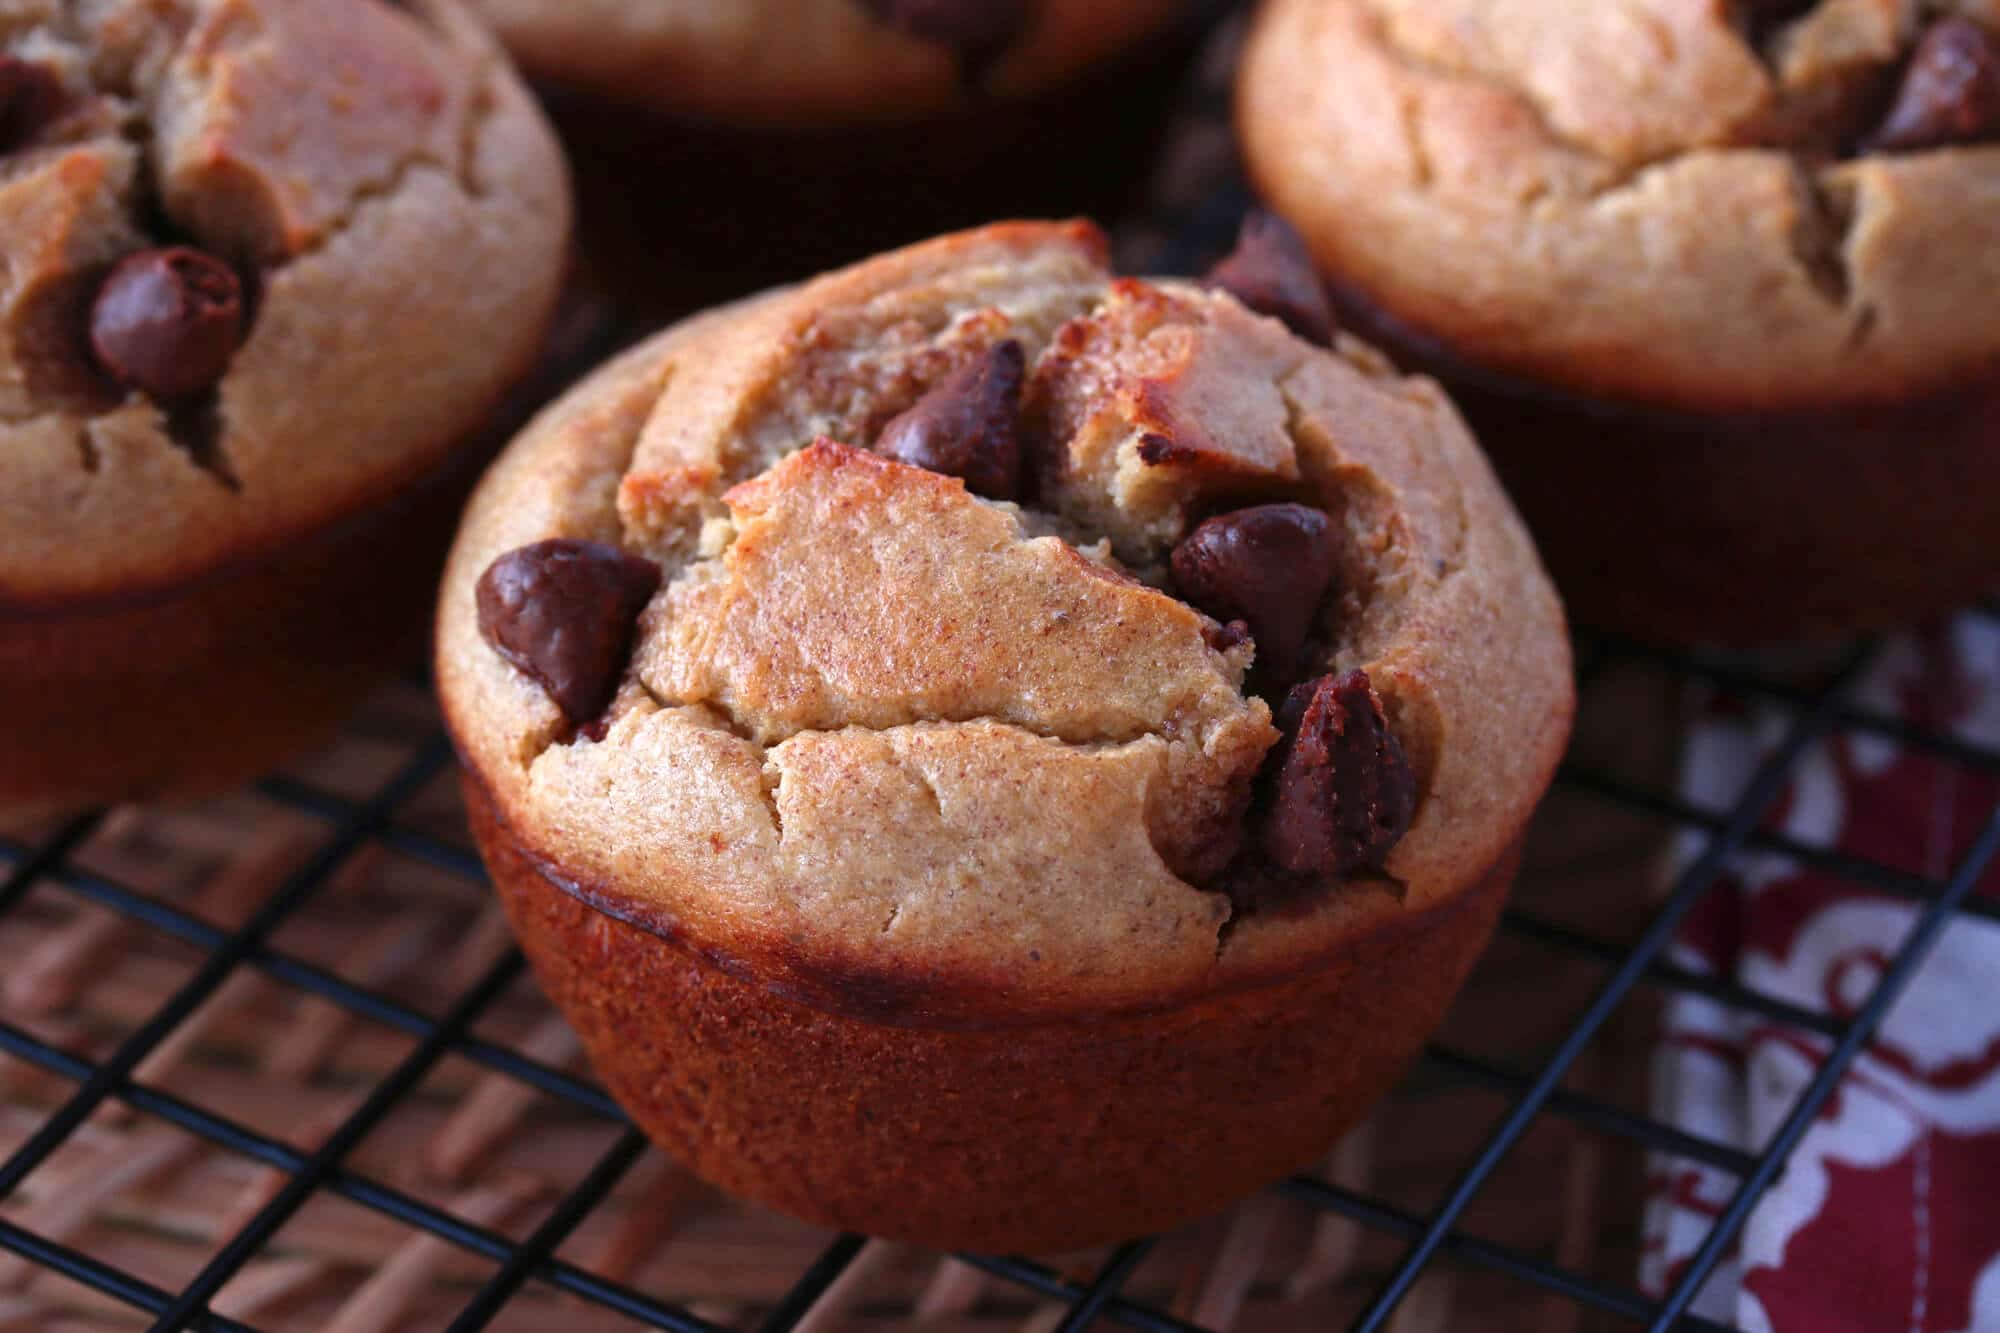 blender muffins recipe easy healthy without flour sugar oil gluten free chocolate chips banana